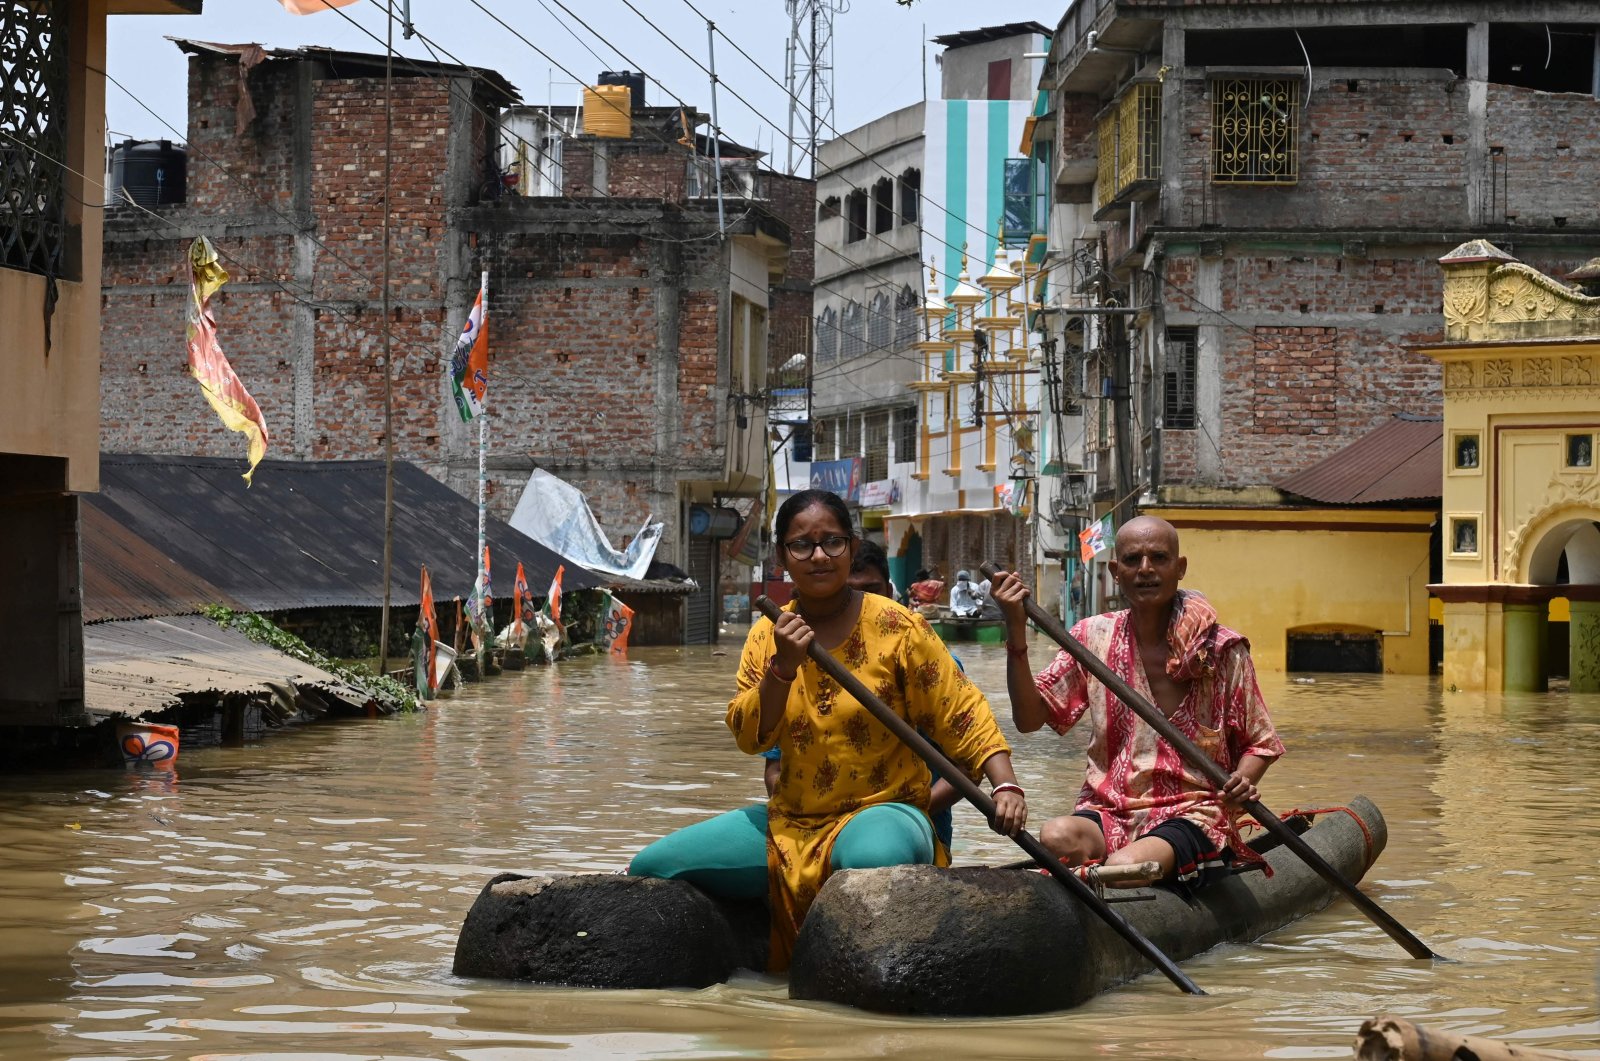 Residents ride a boat over a road submerged by floodwaters following heavy monsoon rains in Ghatal, around 100 kilometers (61 miles) from Kolkata, India, Aug. 2, 2021. (AFP Photo)